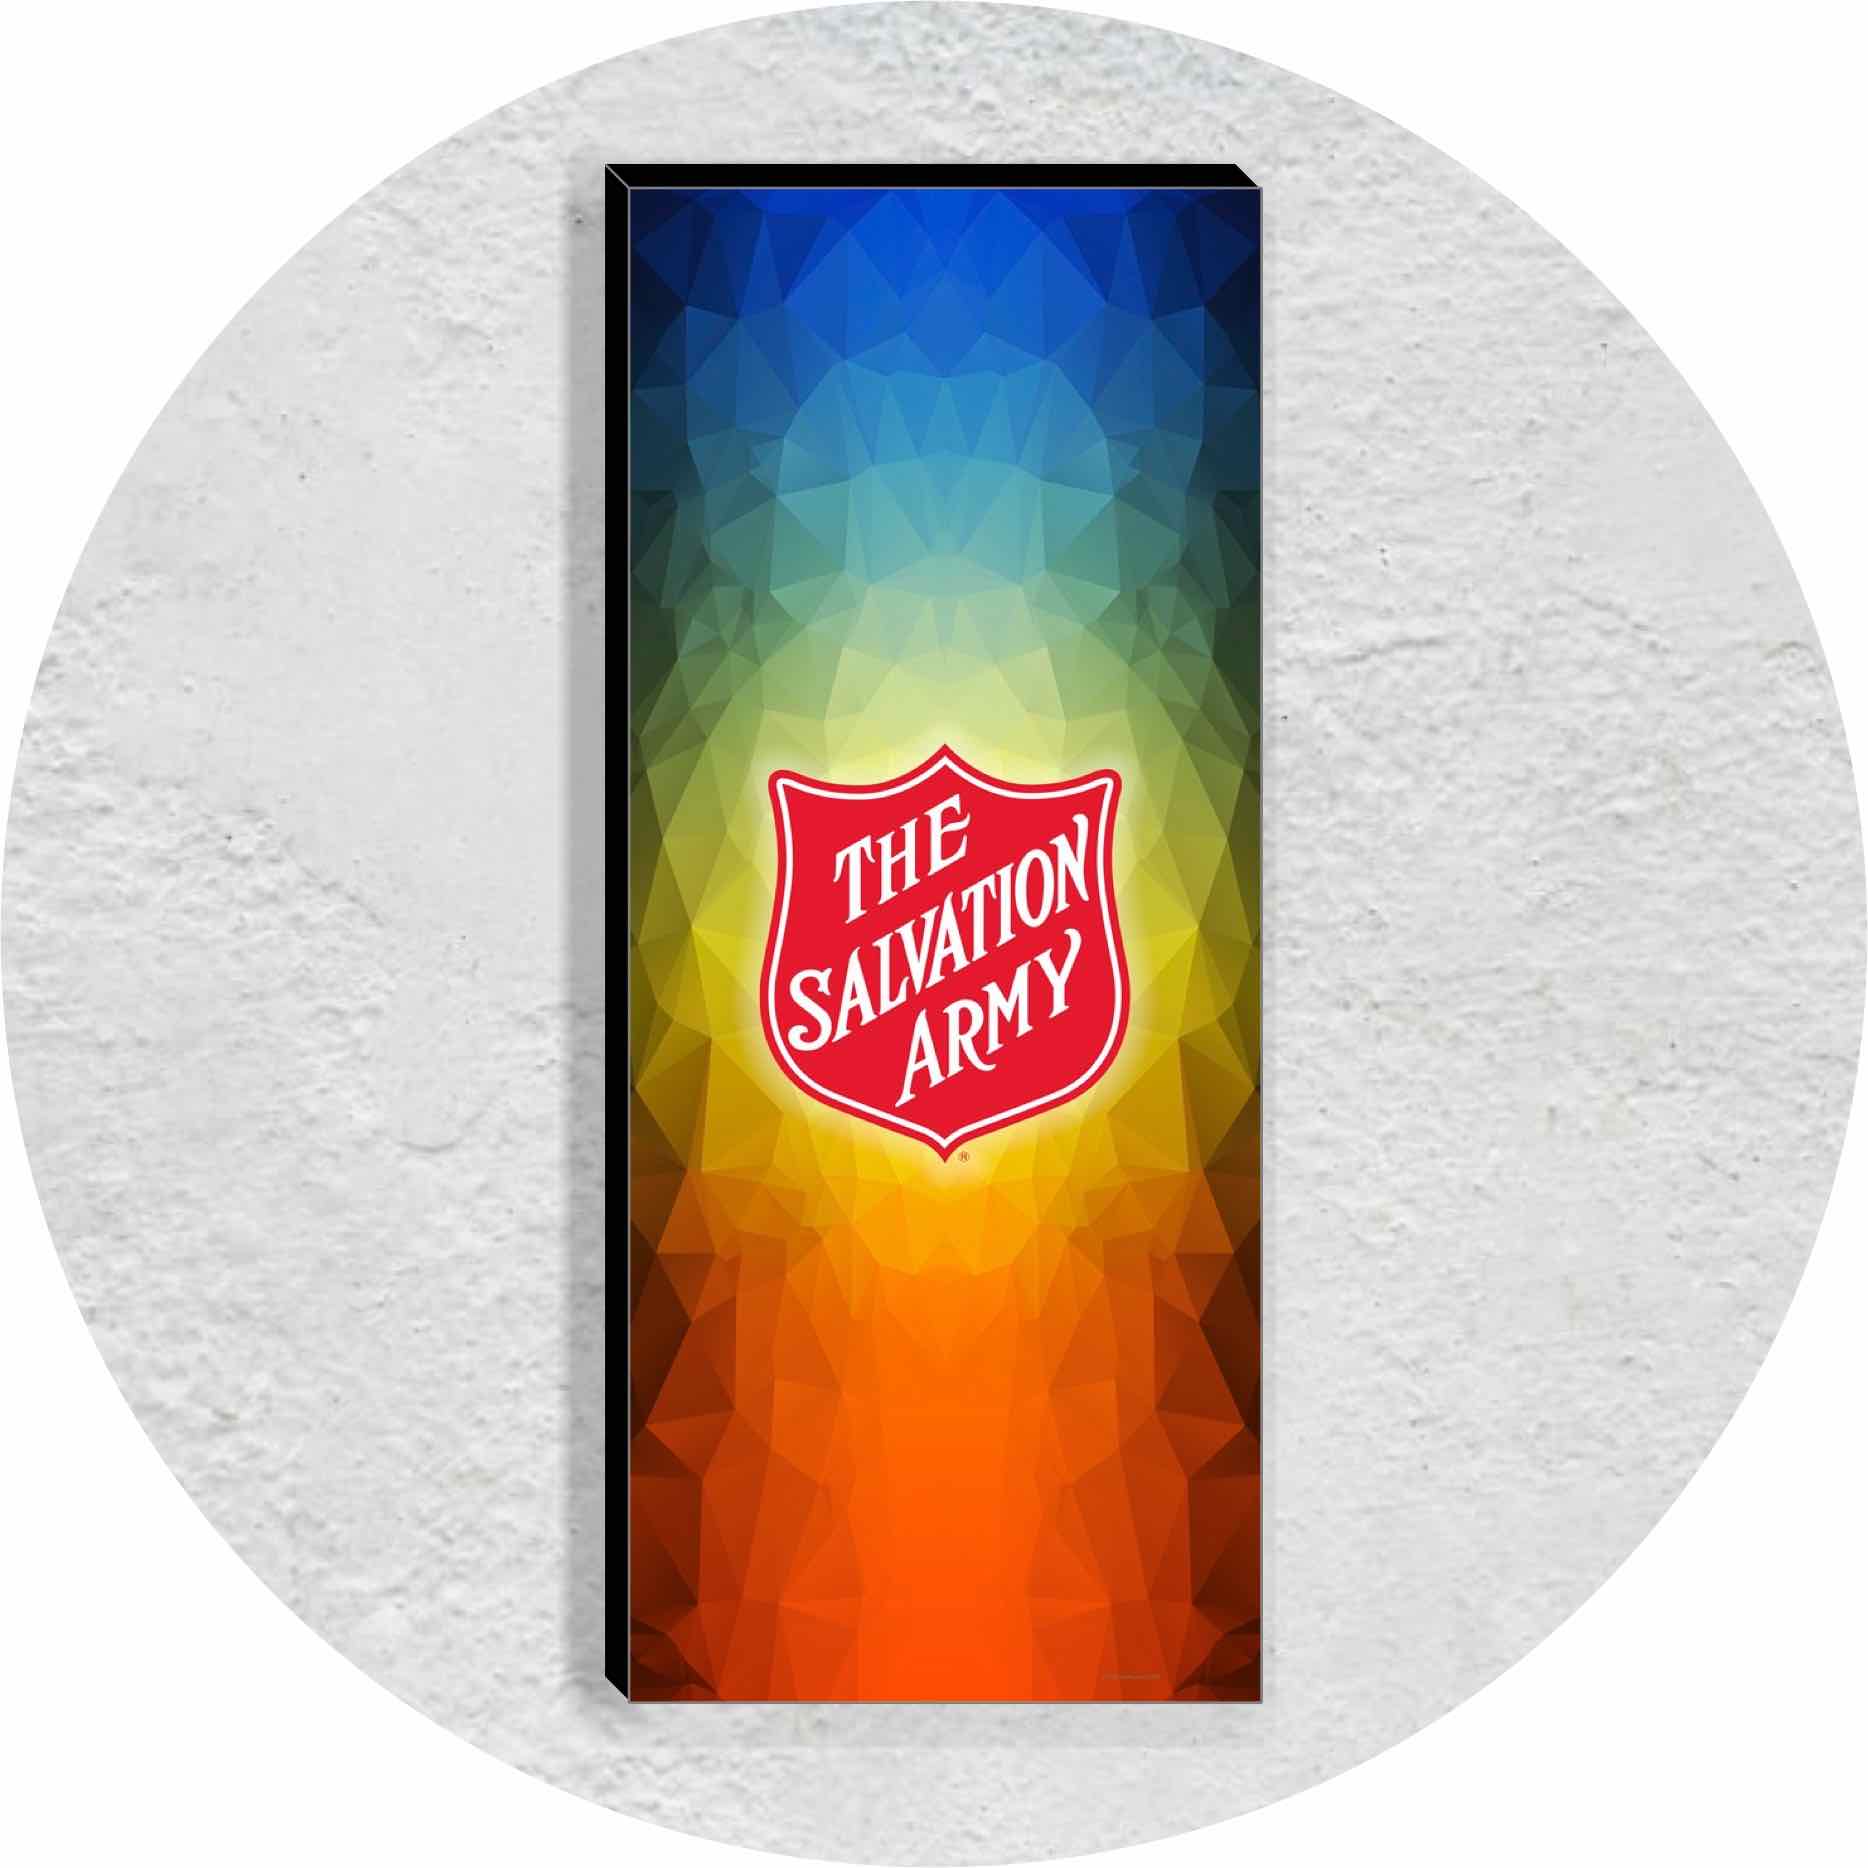 multiple canvas artworks for display in salvation army corps